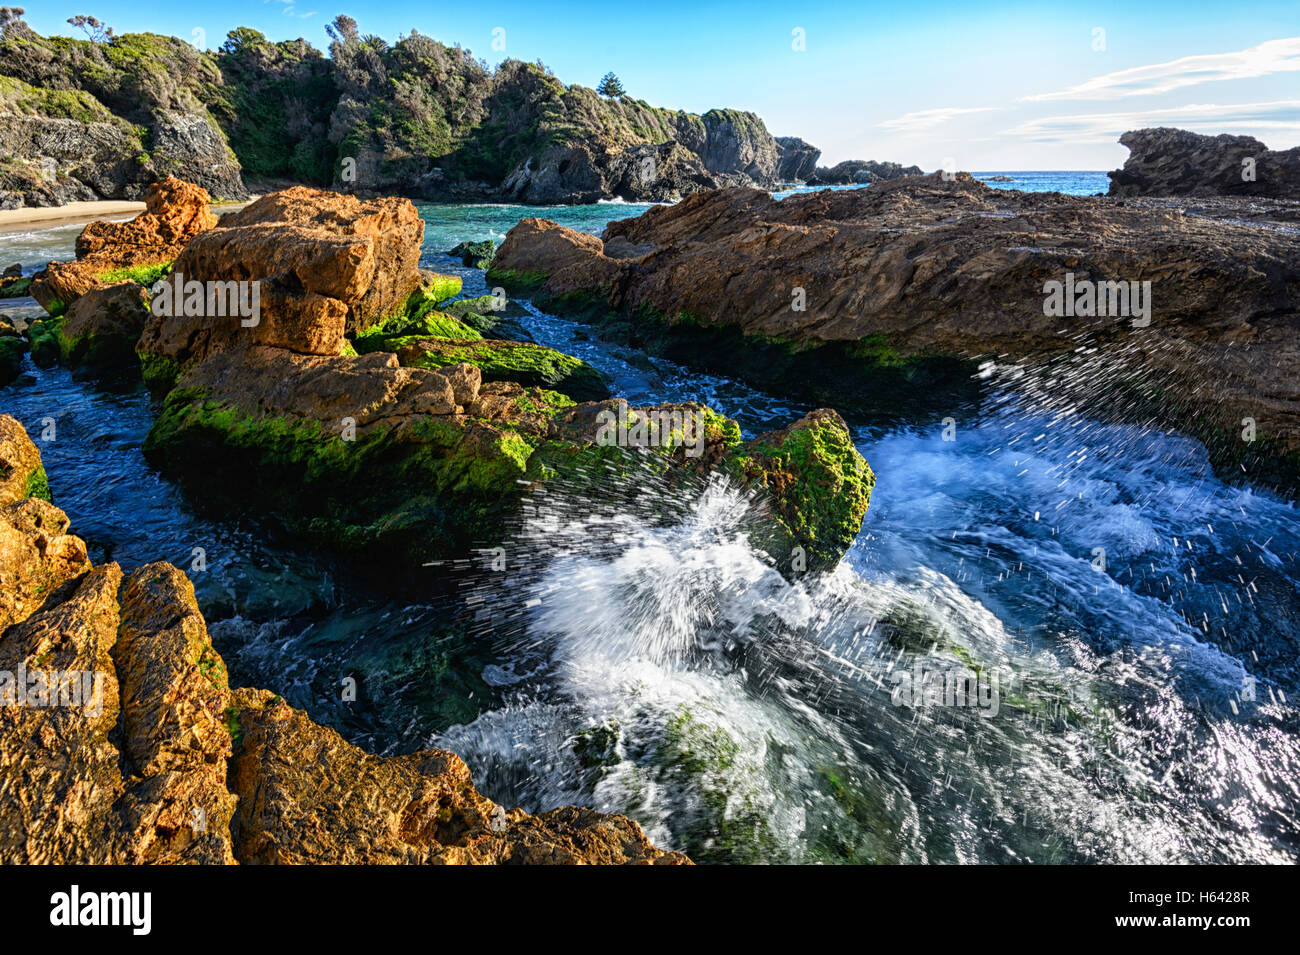 View of Pillow lava. This rock shape is most often the result of undersea volcano eruptions.Narooma Surf Beach, New South Wales, NSW, Australia Stock Photo